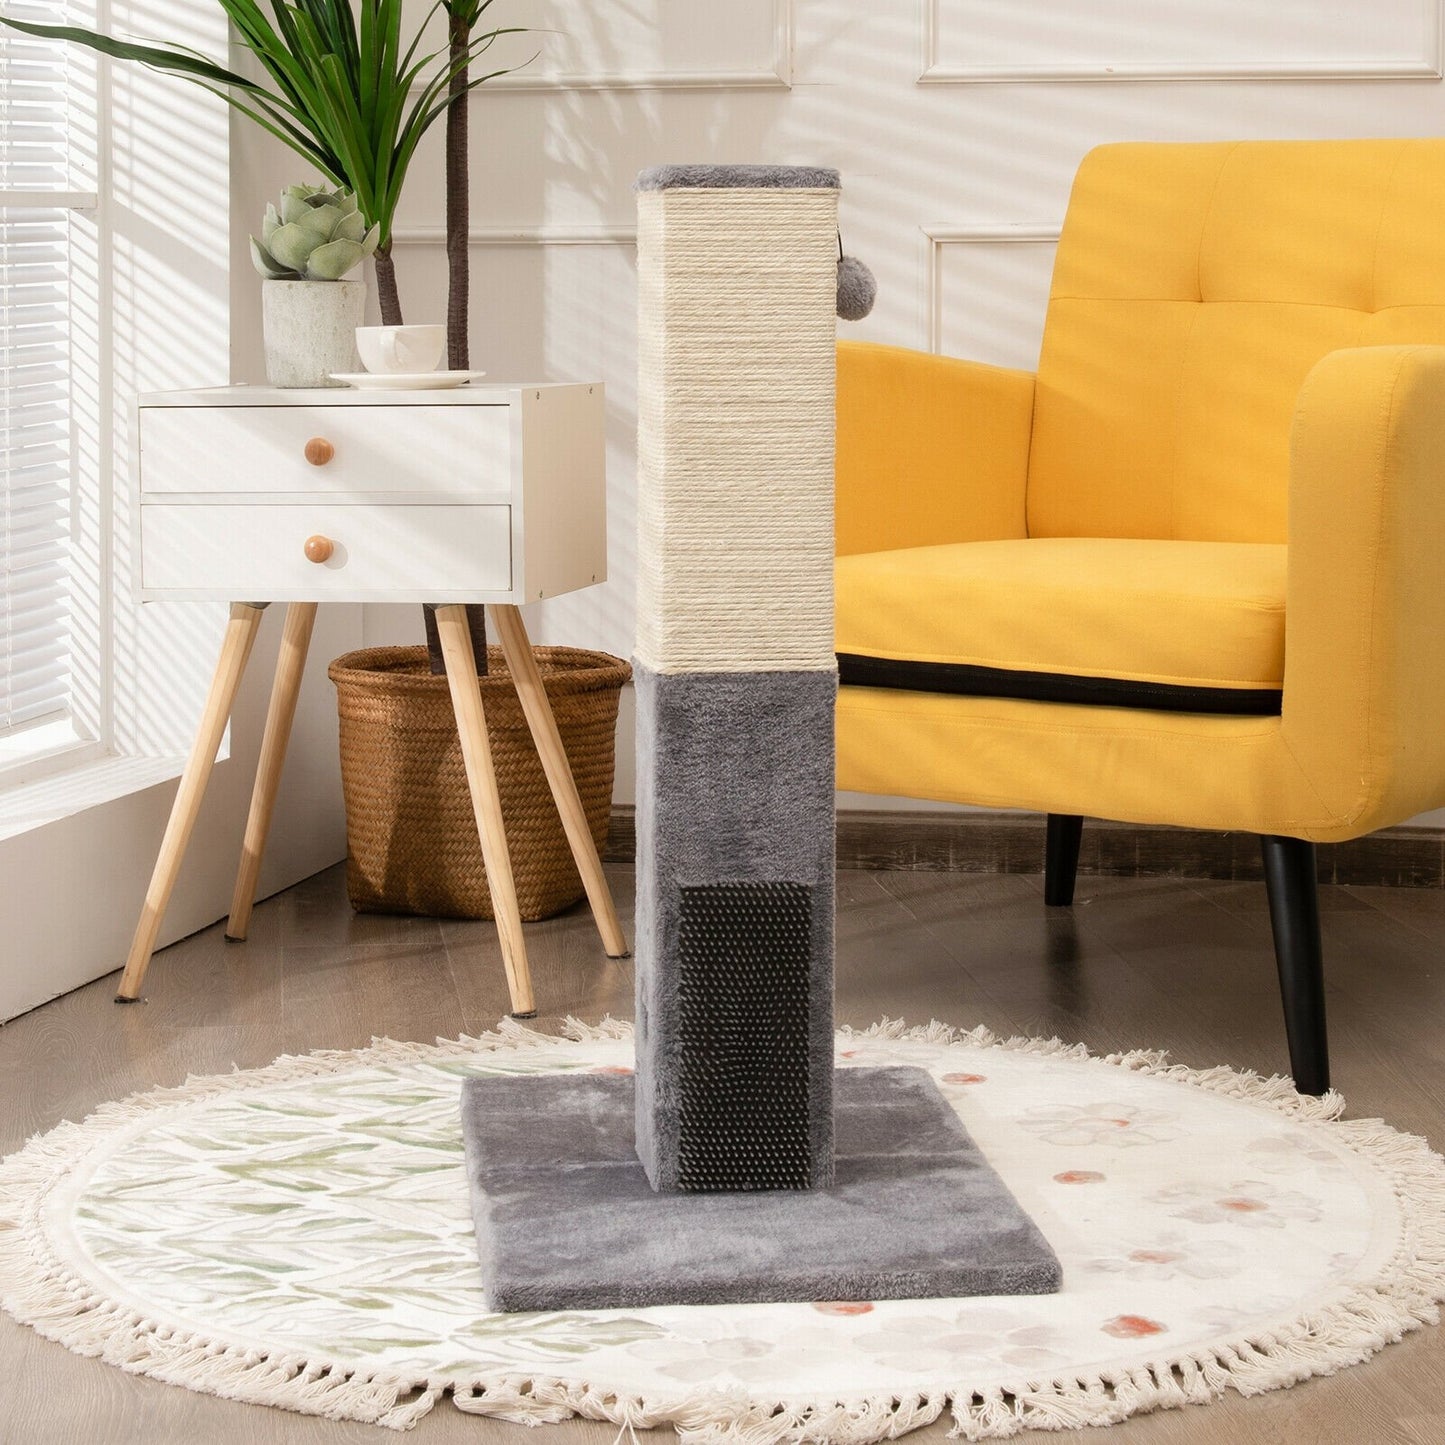 31 inch Tall Cat Scratching Post Claw Scratcher with Sisal Rope and 2 plush Ball, Gray at Gallery Canada